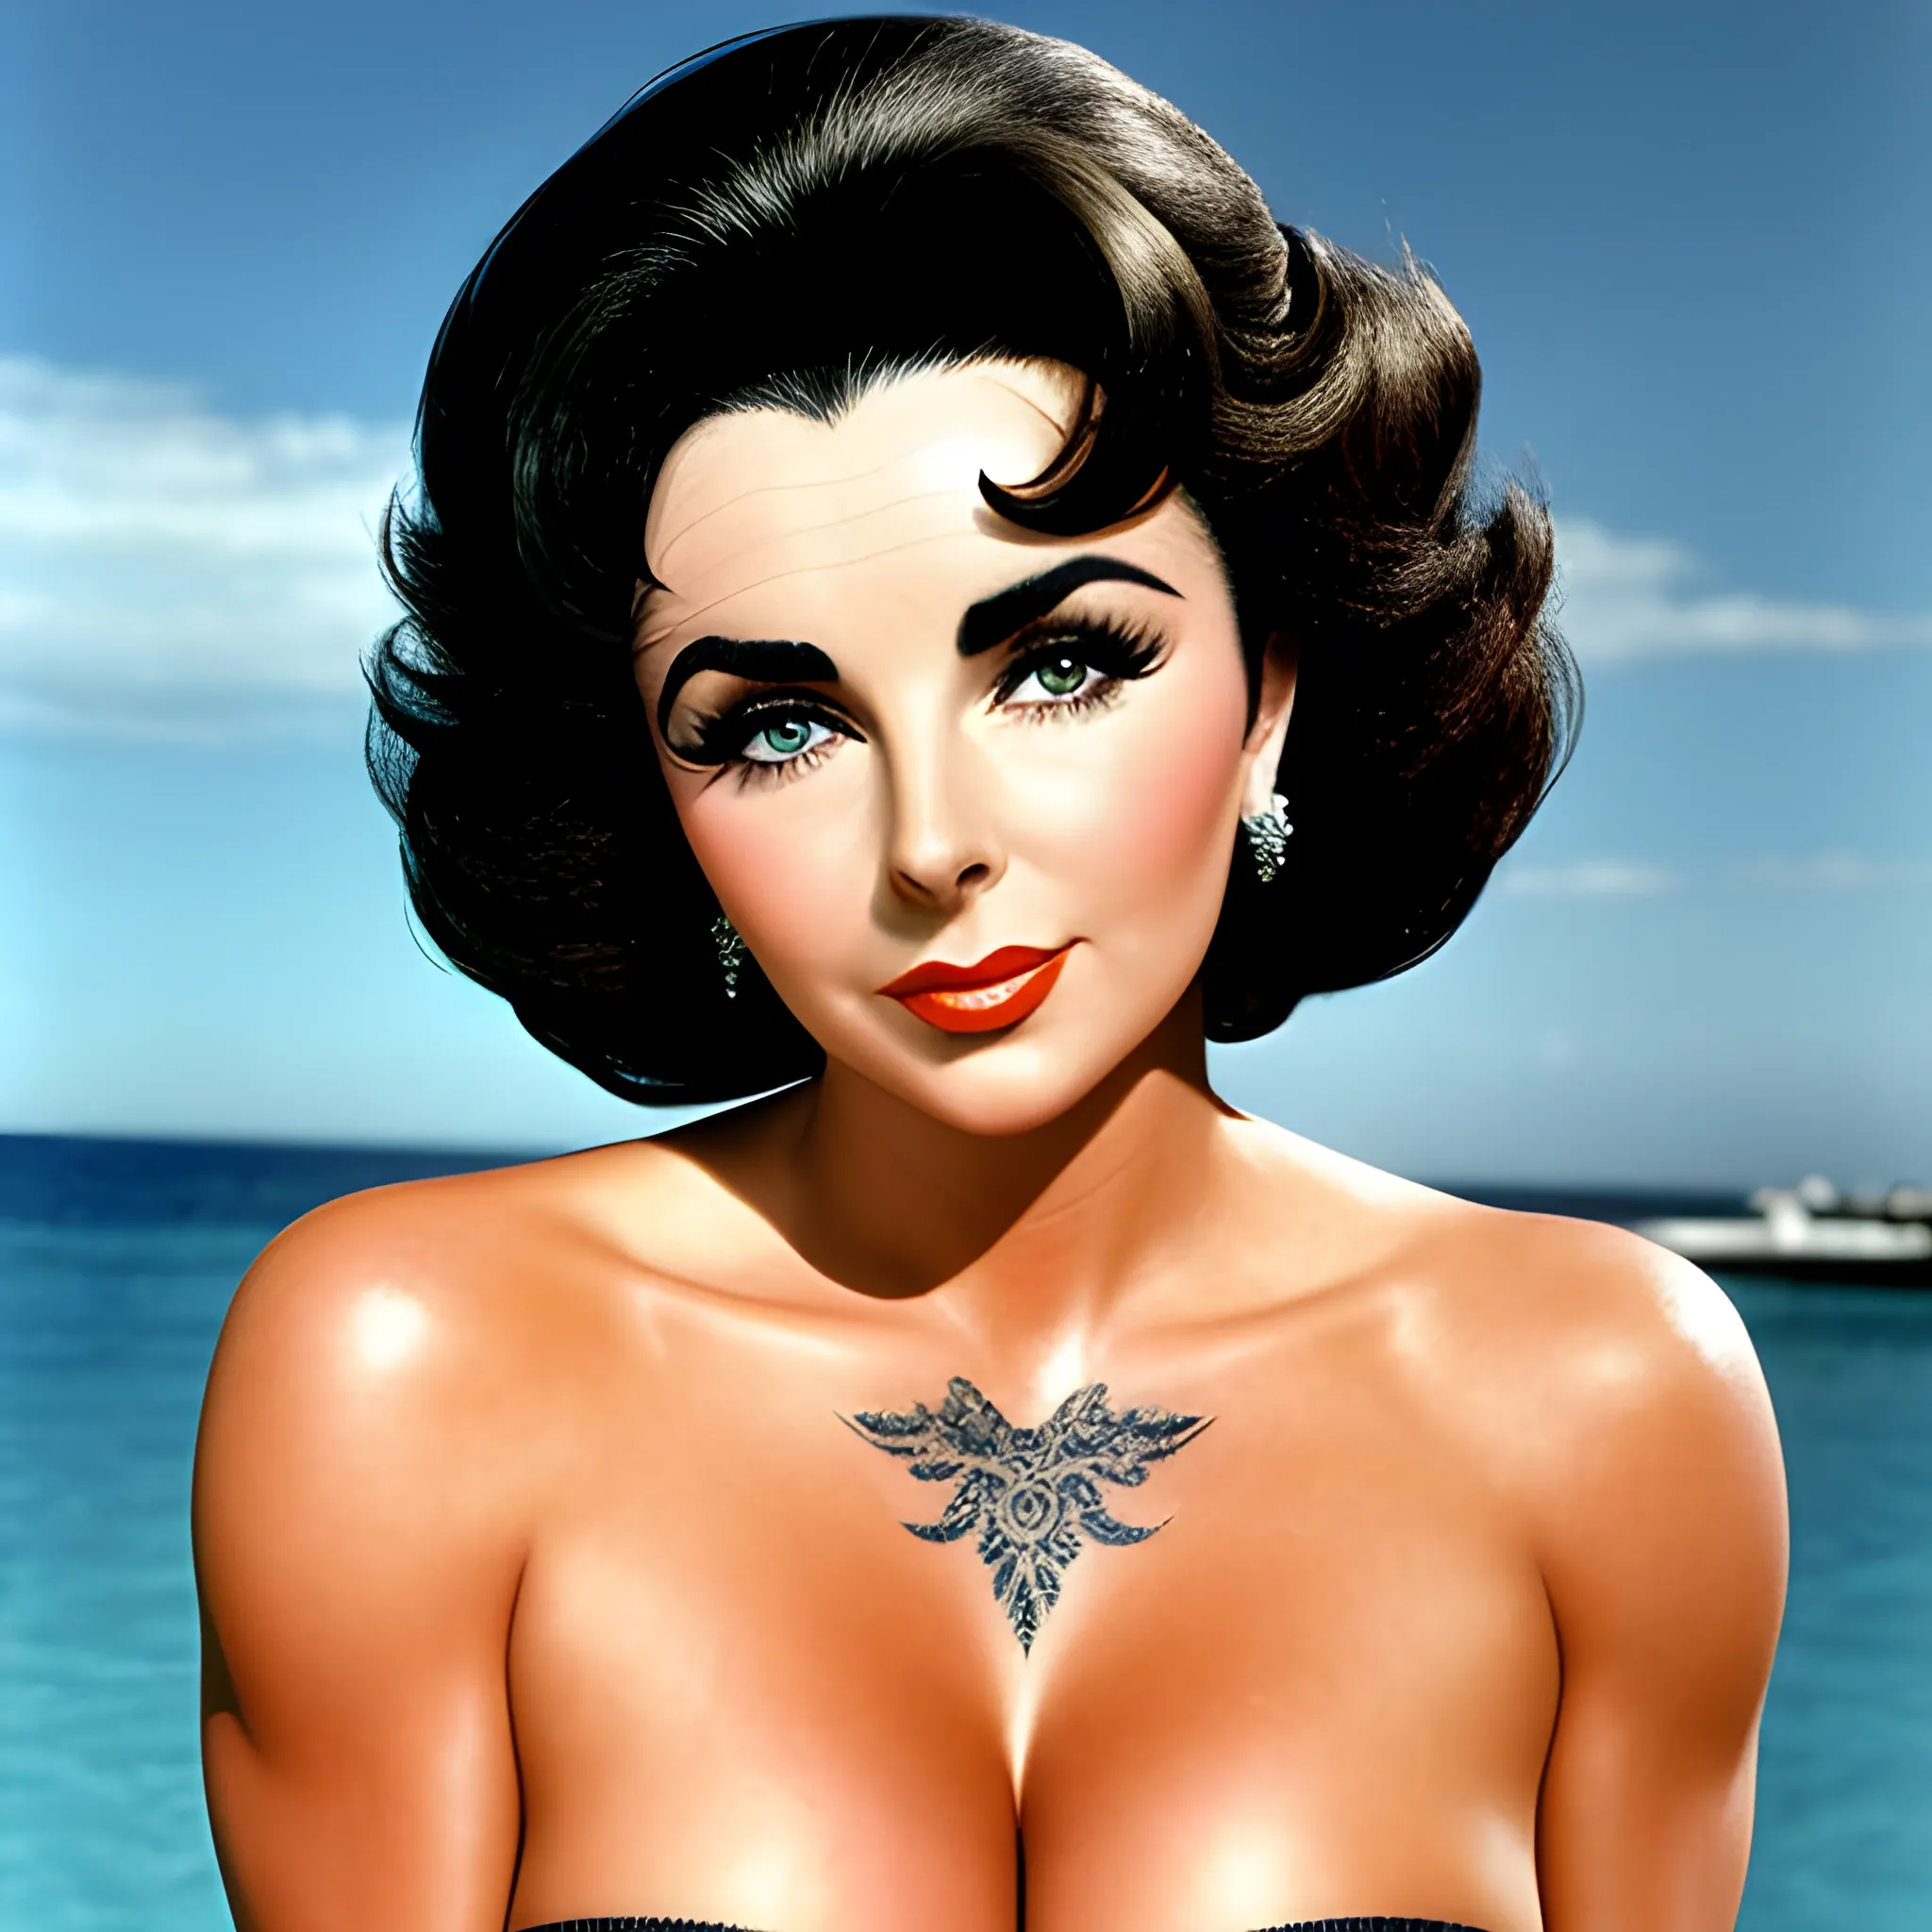 Elizabeth Taylor in the present time, in her youth, who has the style of today's girls and has an athletic body, The skin of his face should be like the body be him, tattoos on her body.